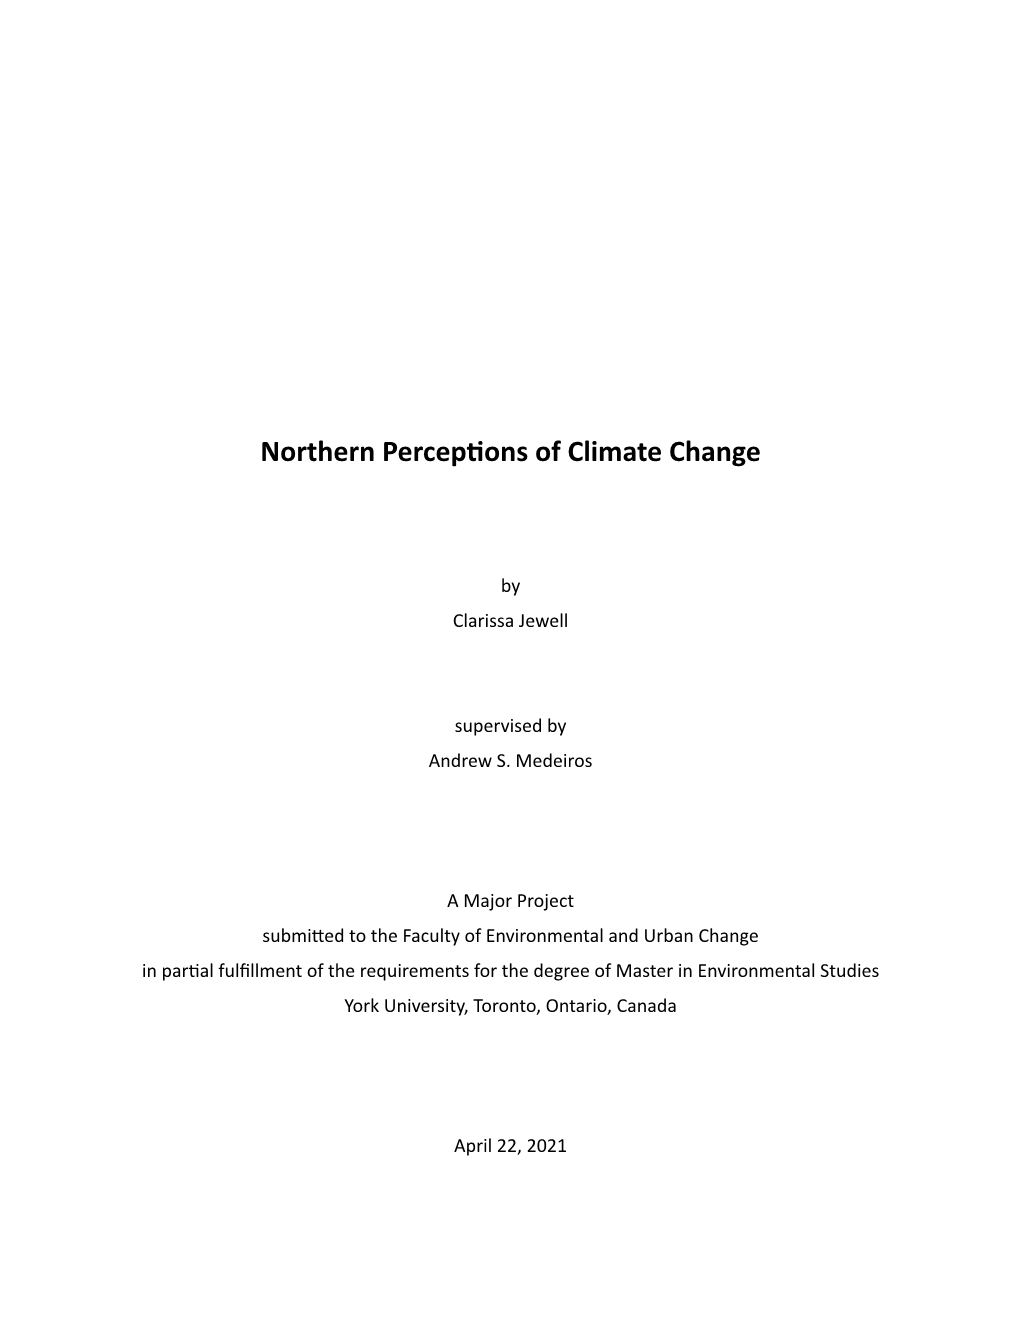 Northern Perceptions of Climate Change